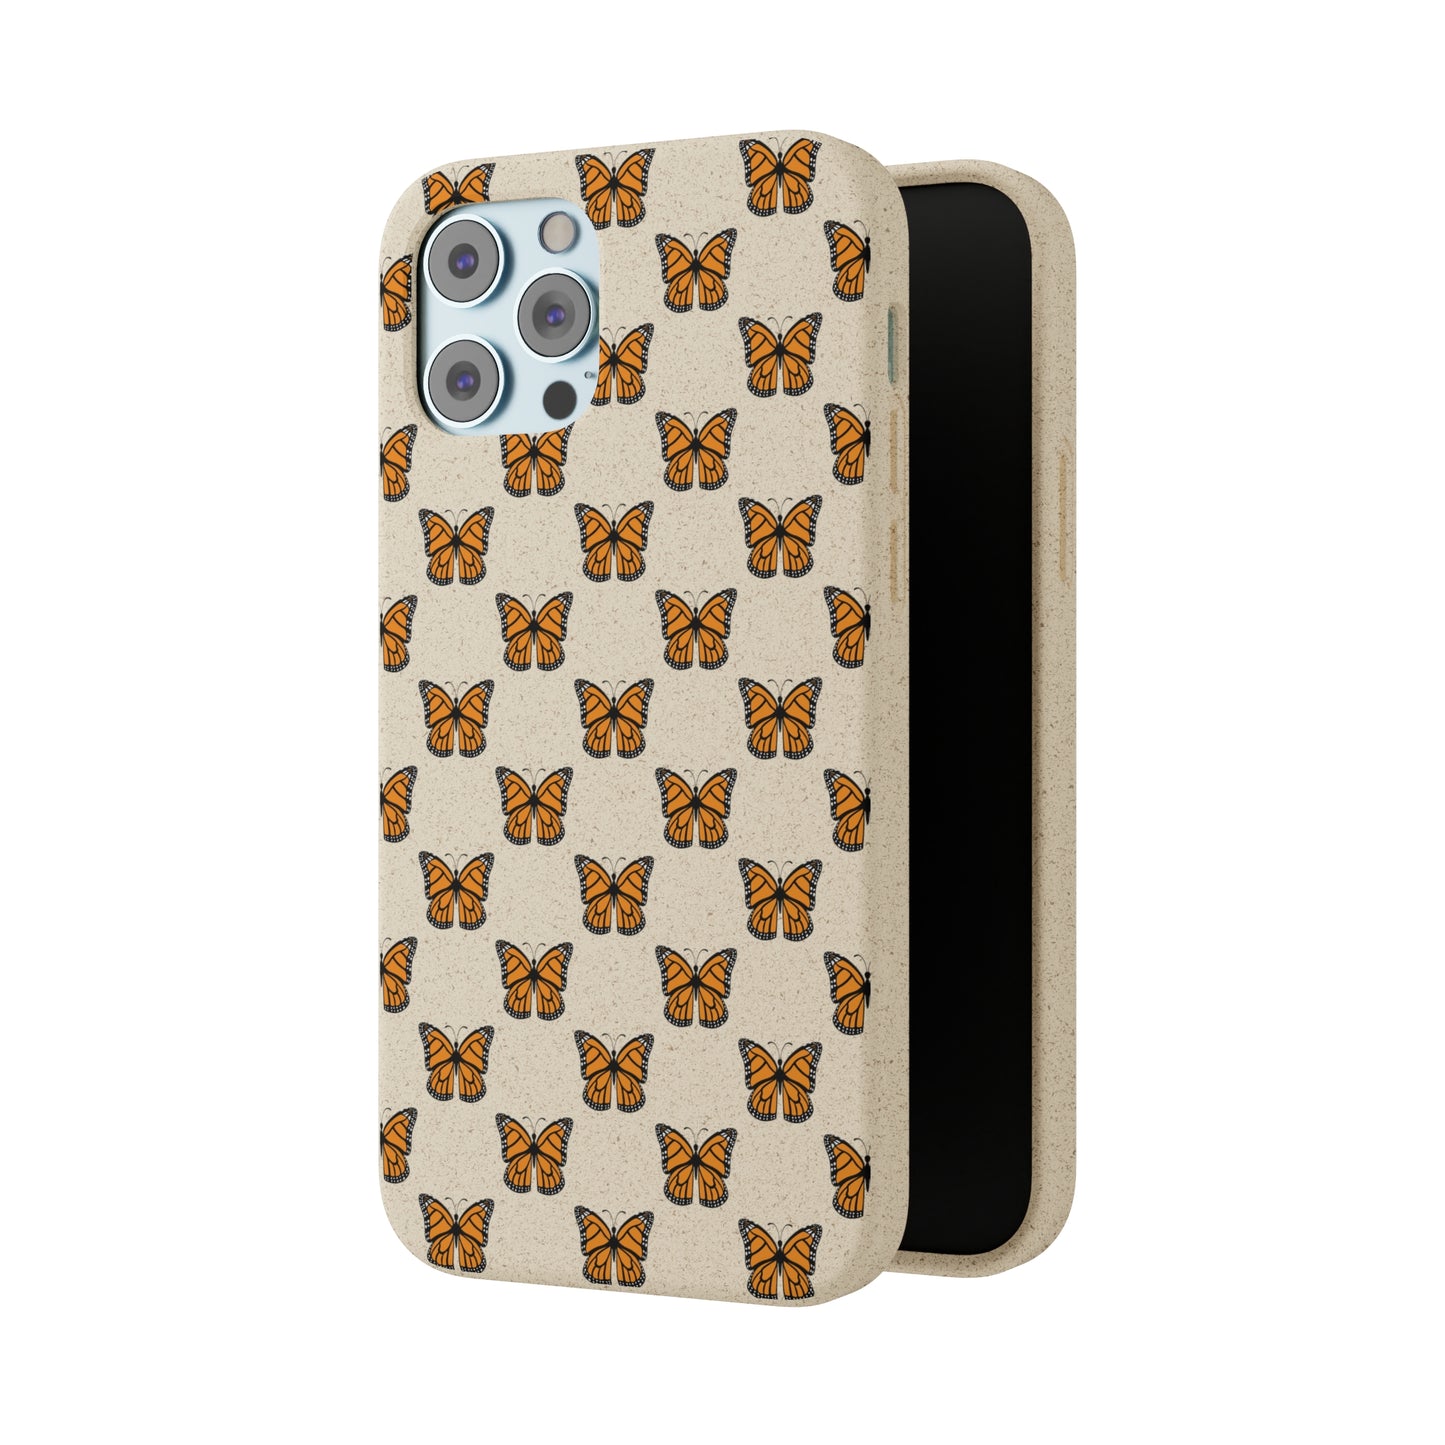 Monarch Butterfly Biodegradable Phone Case: A Fashionable and Eco-Friendly Accessory